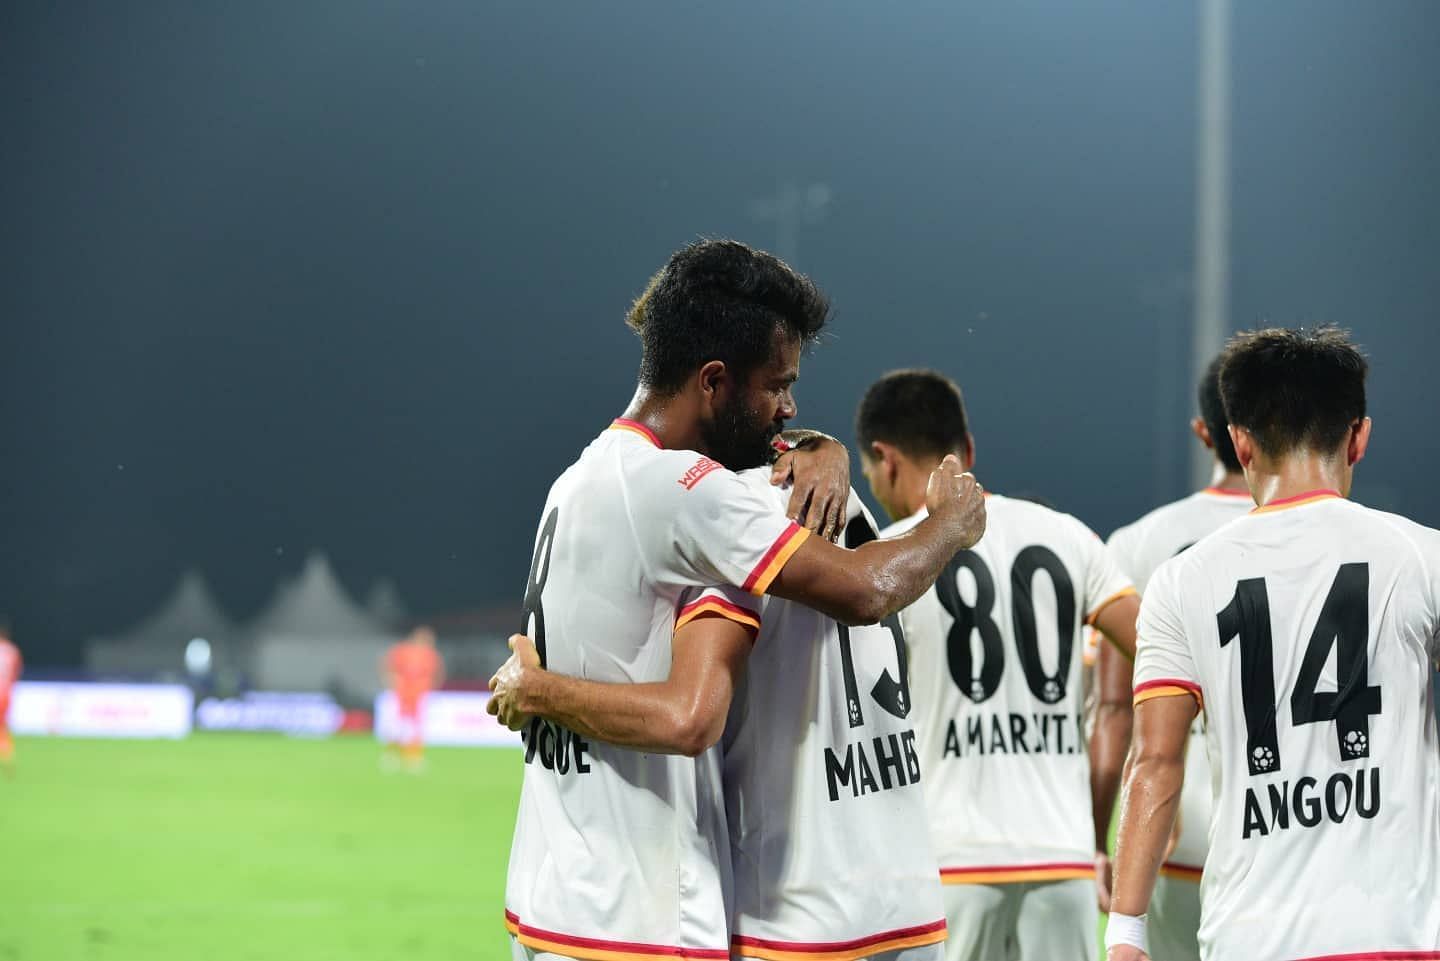 SC East Bengal finally won a game in the ISL 2021-22 season (Image courtesy: SC East Bengal media)